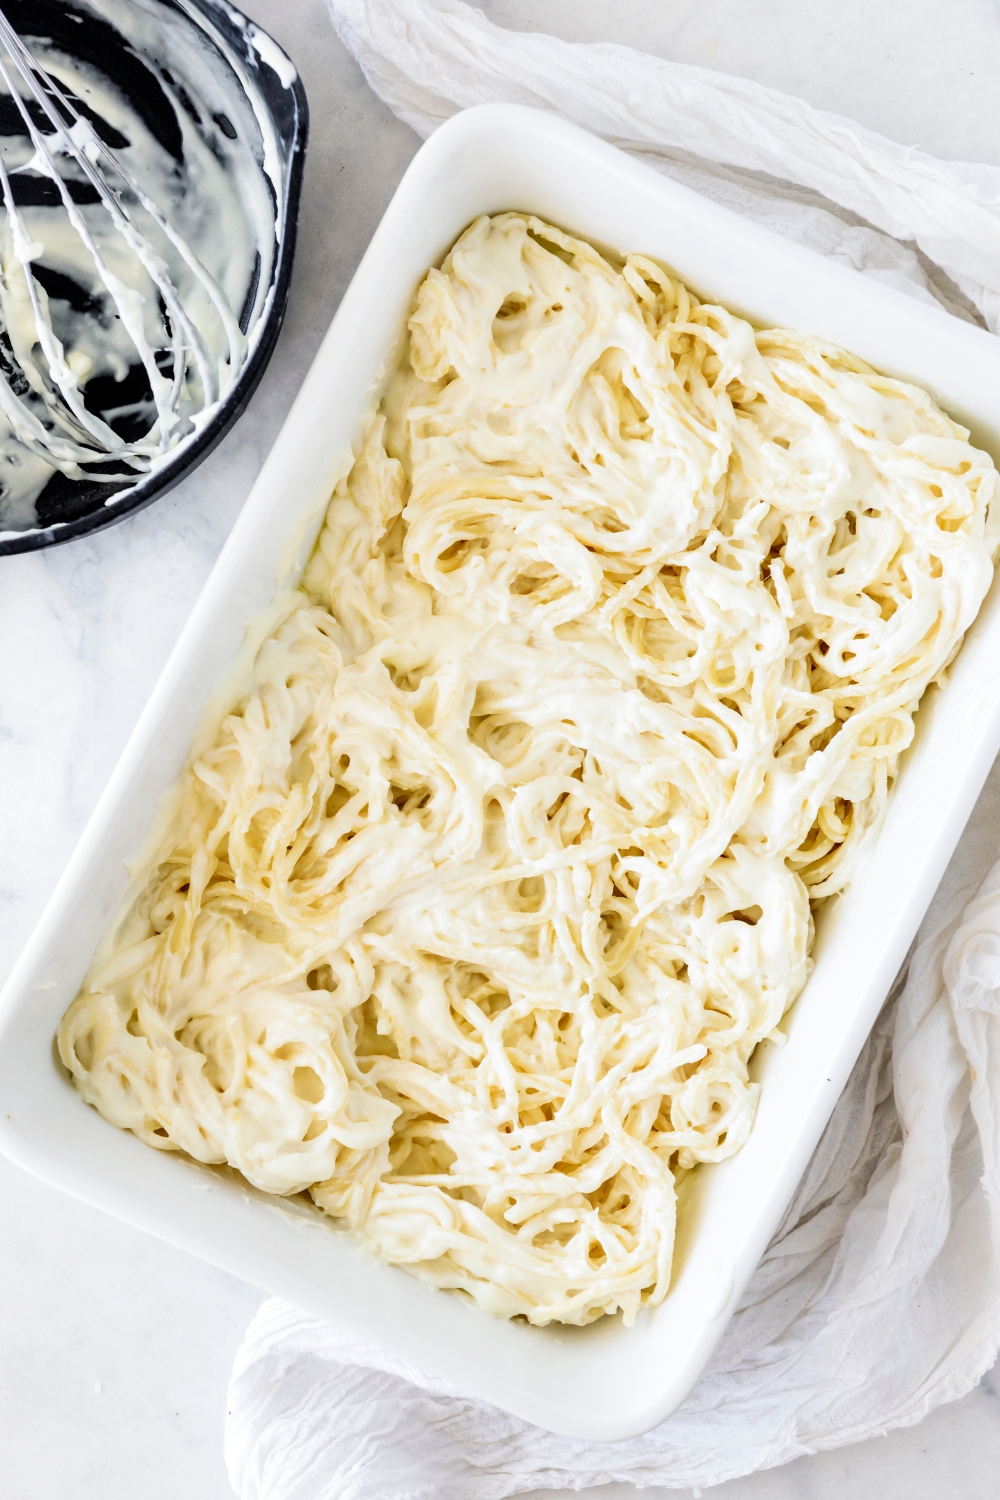 A baking dish filled with cooked spaghetti and Alfredo sauce.